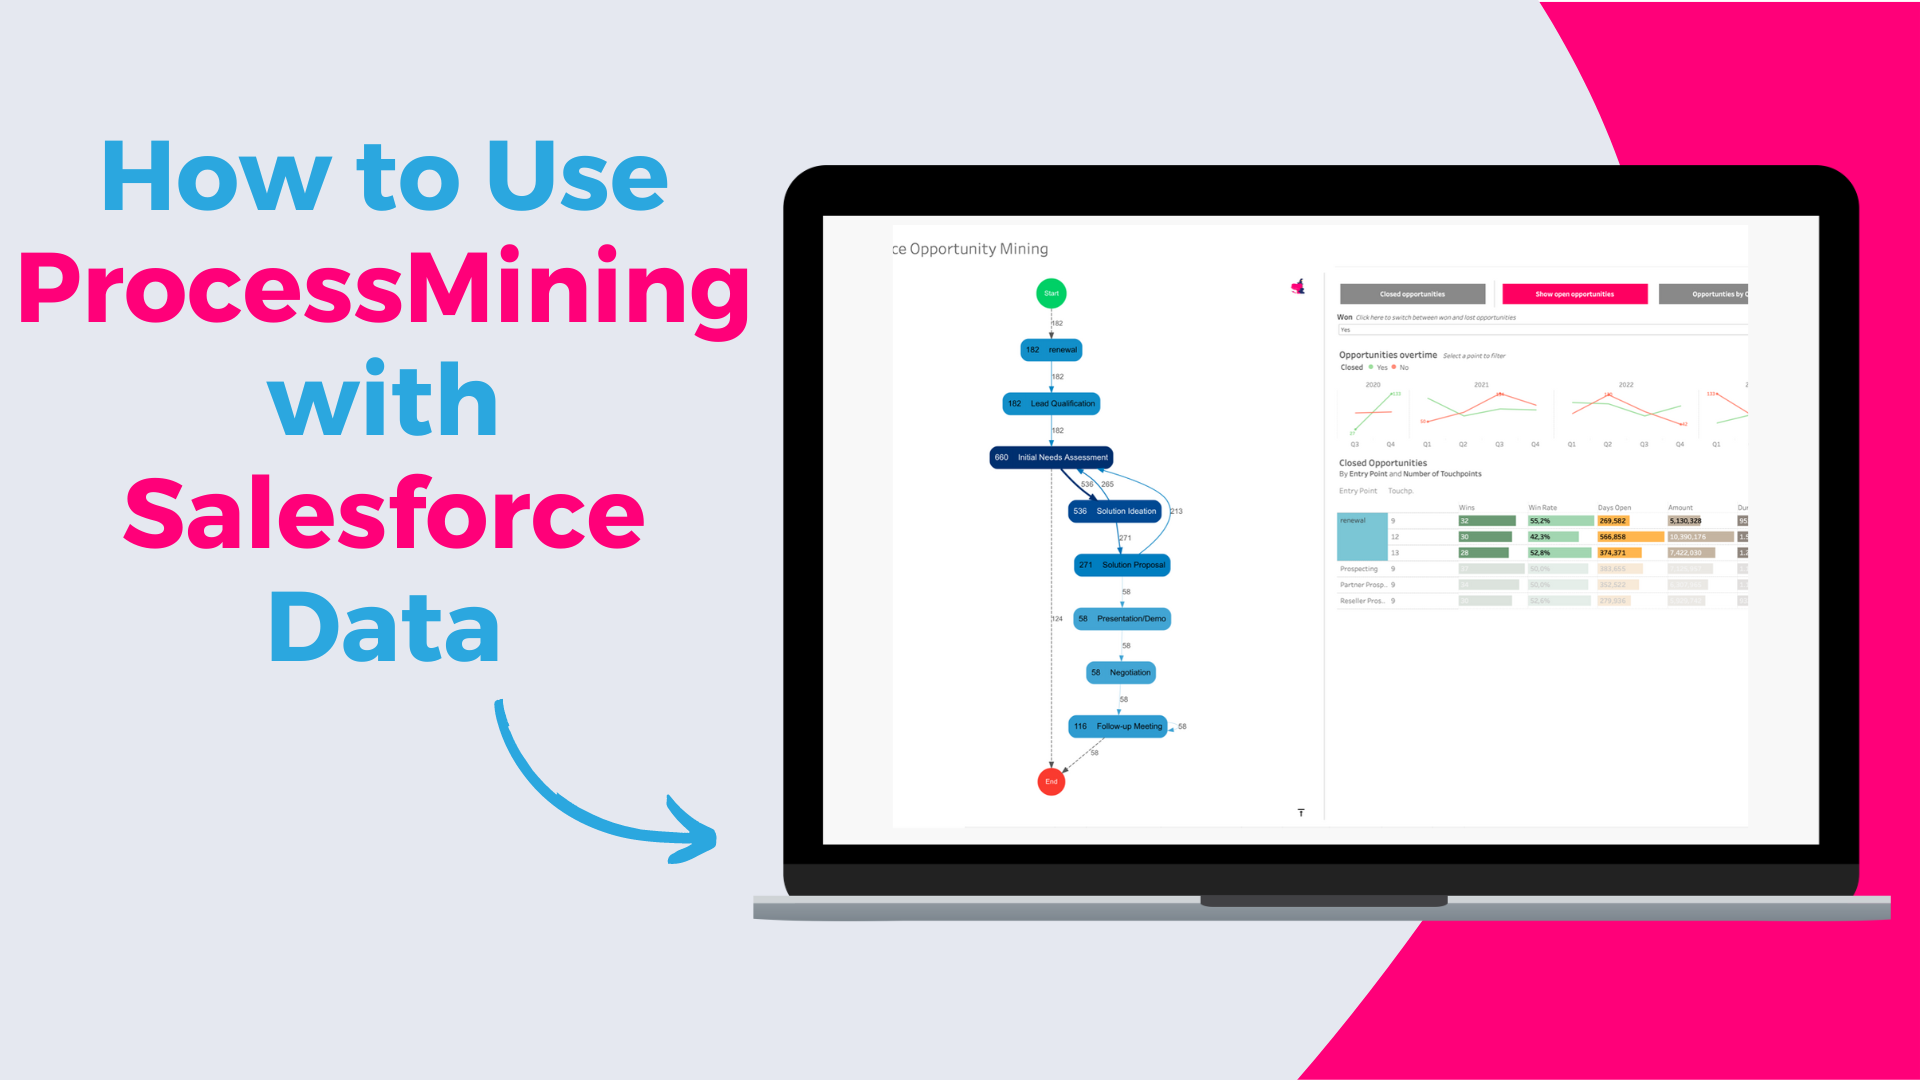 Salesforce Opportunity Mining